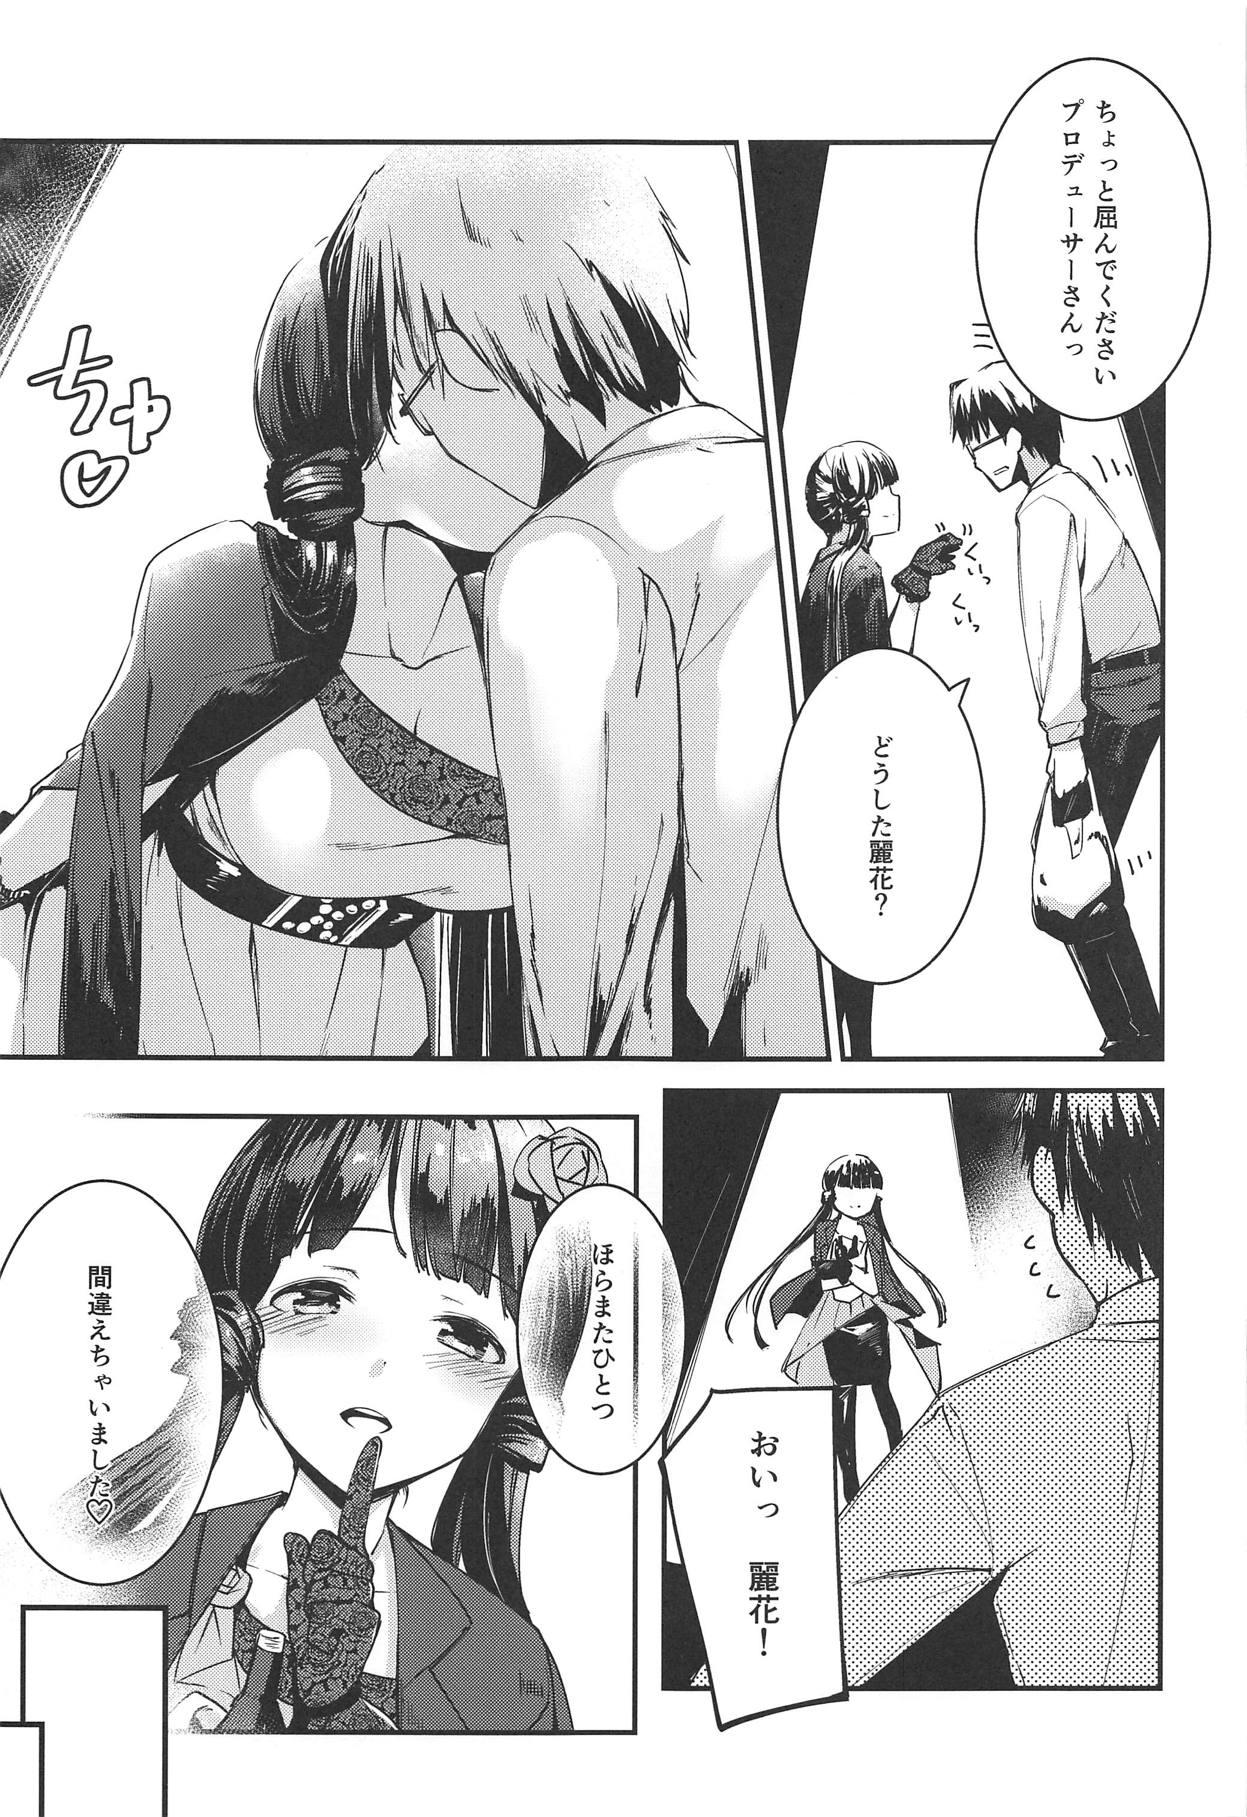 Bed THEATER LOVERS 06 9:02am - The idolmaster Linda - Page 4